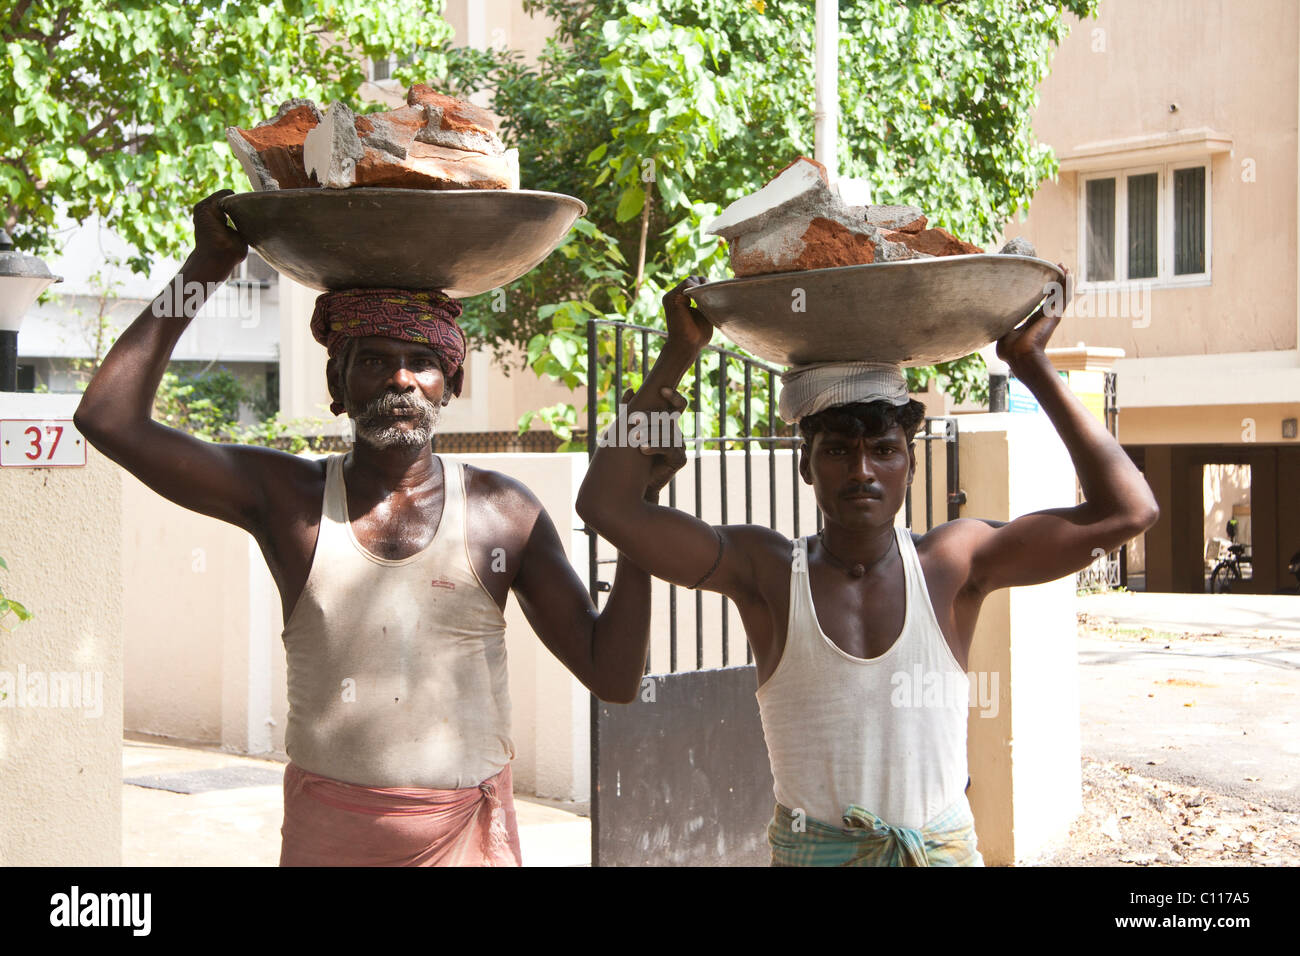 Two Indian builders carrying bricks on their heads Stock Photo